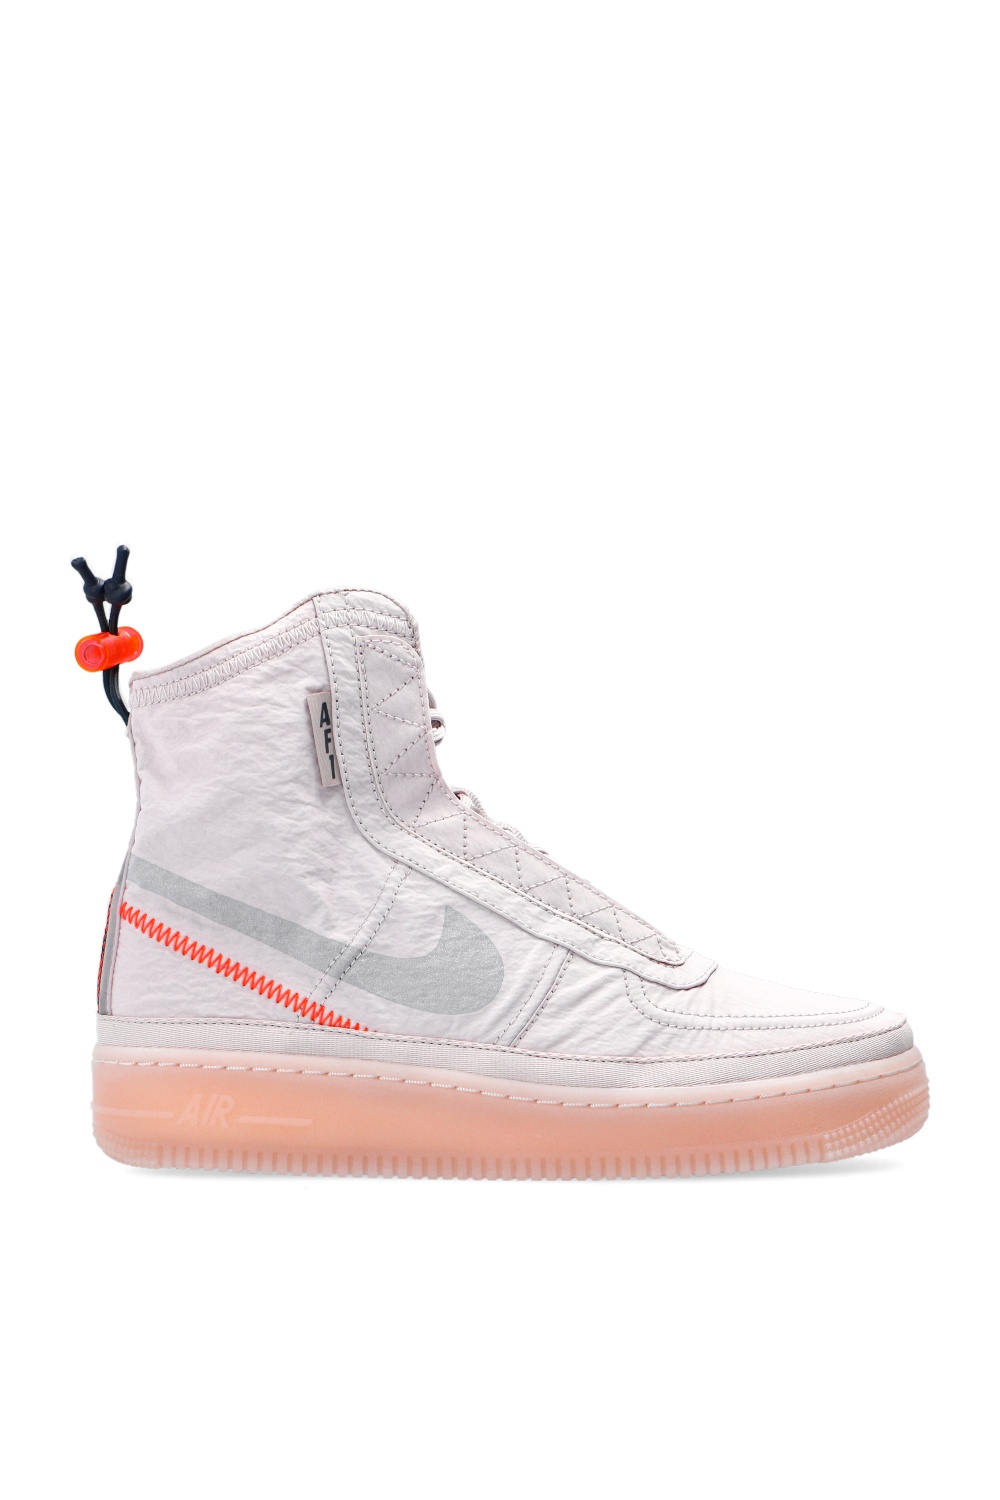 nike air force 1 shell sneaker boot